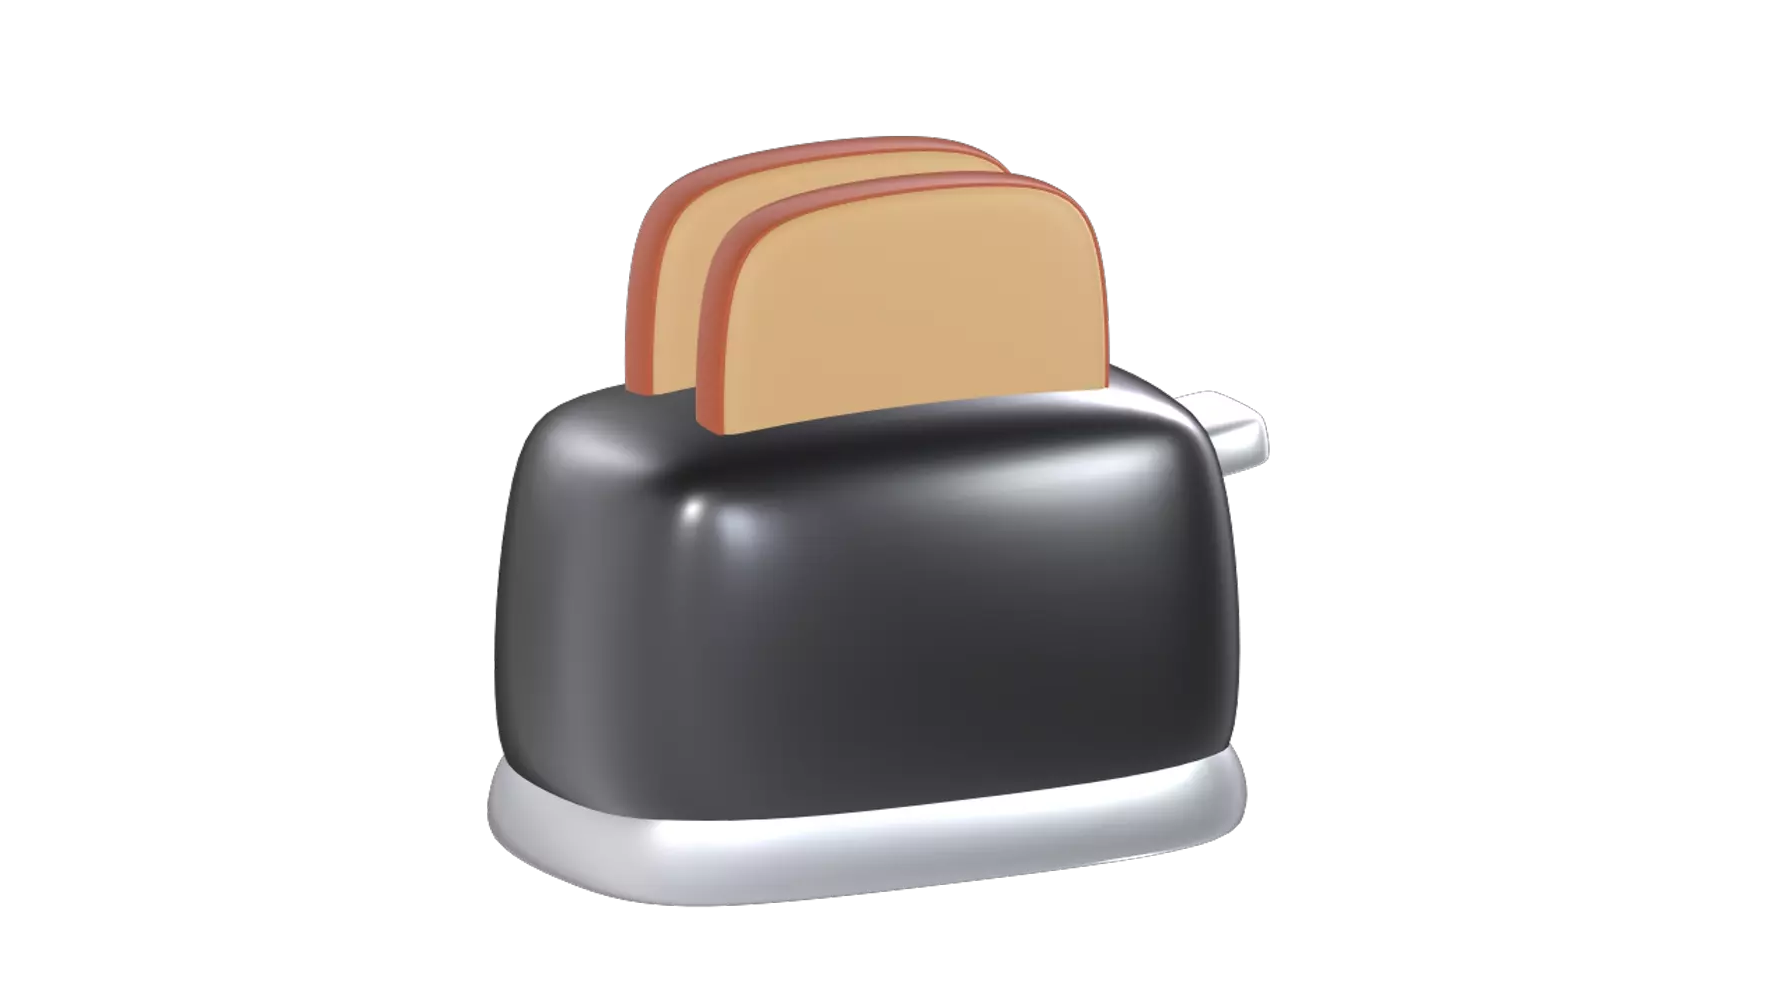 Toaster 3D Graphic